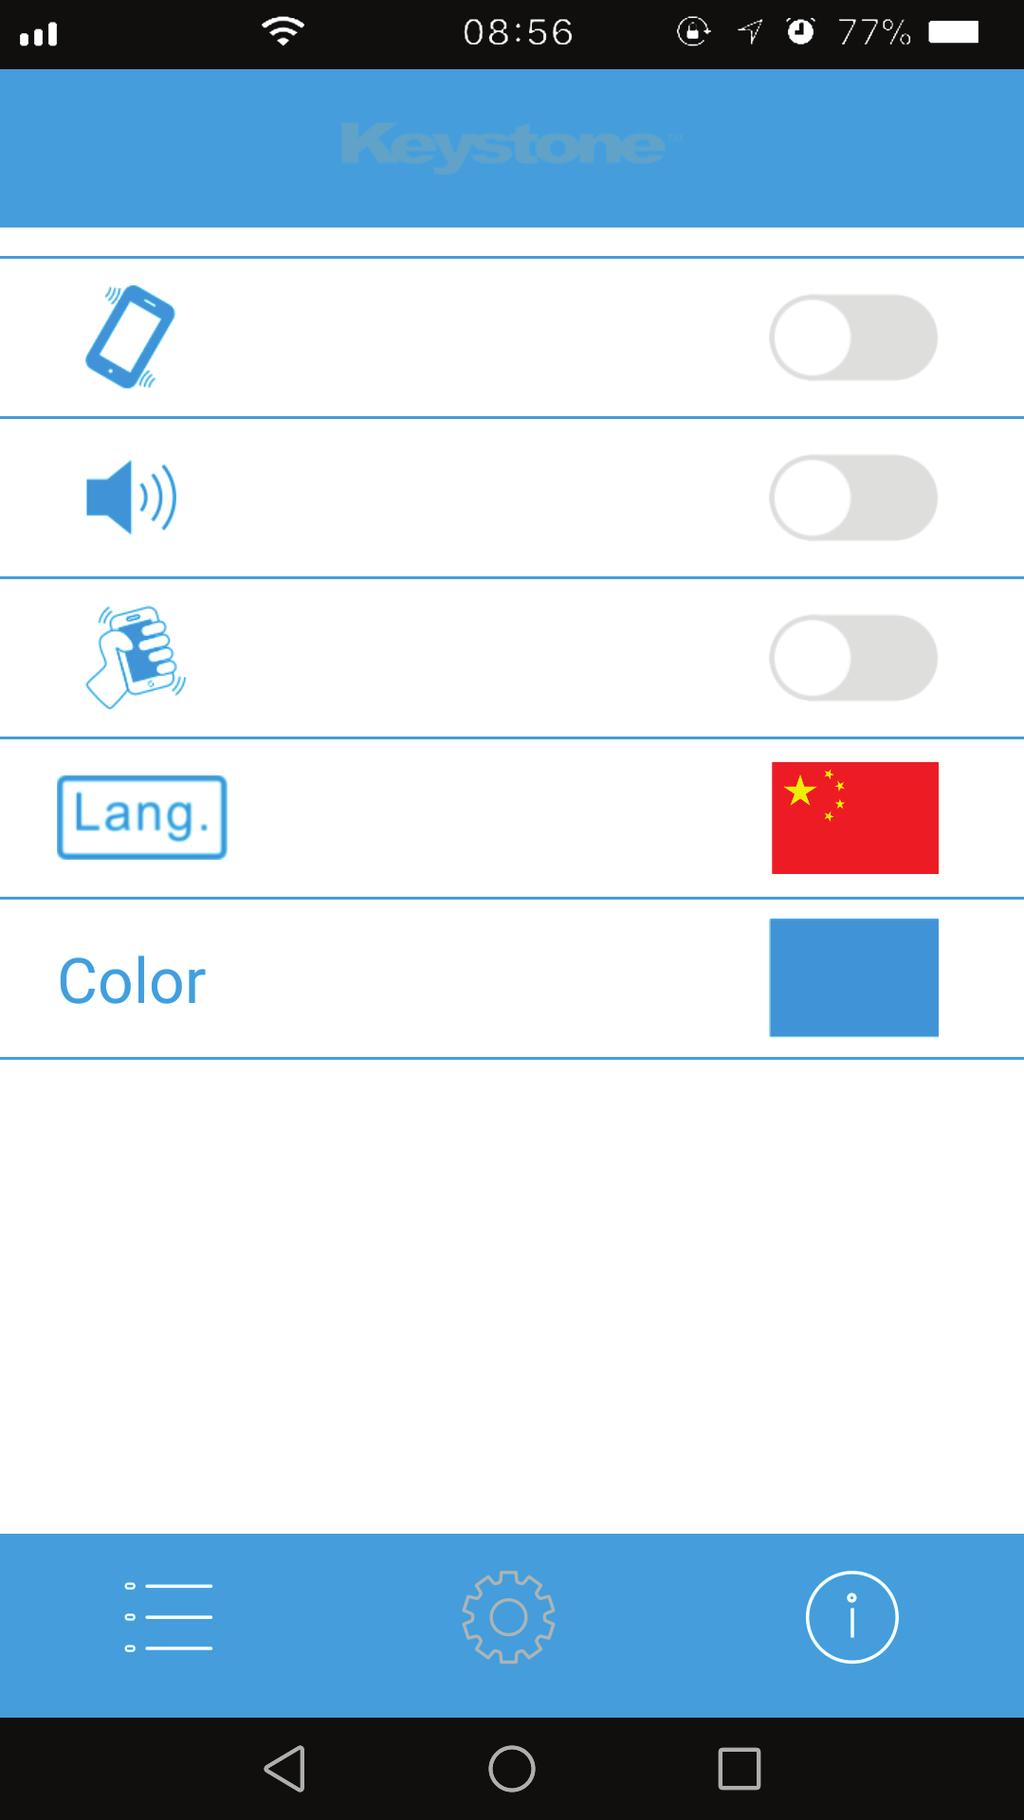 Language setting: You can choose the